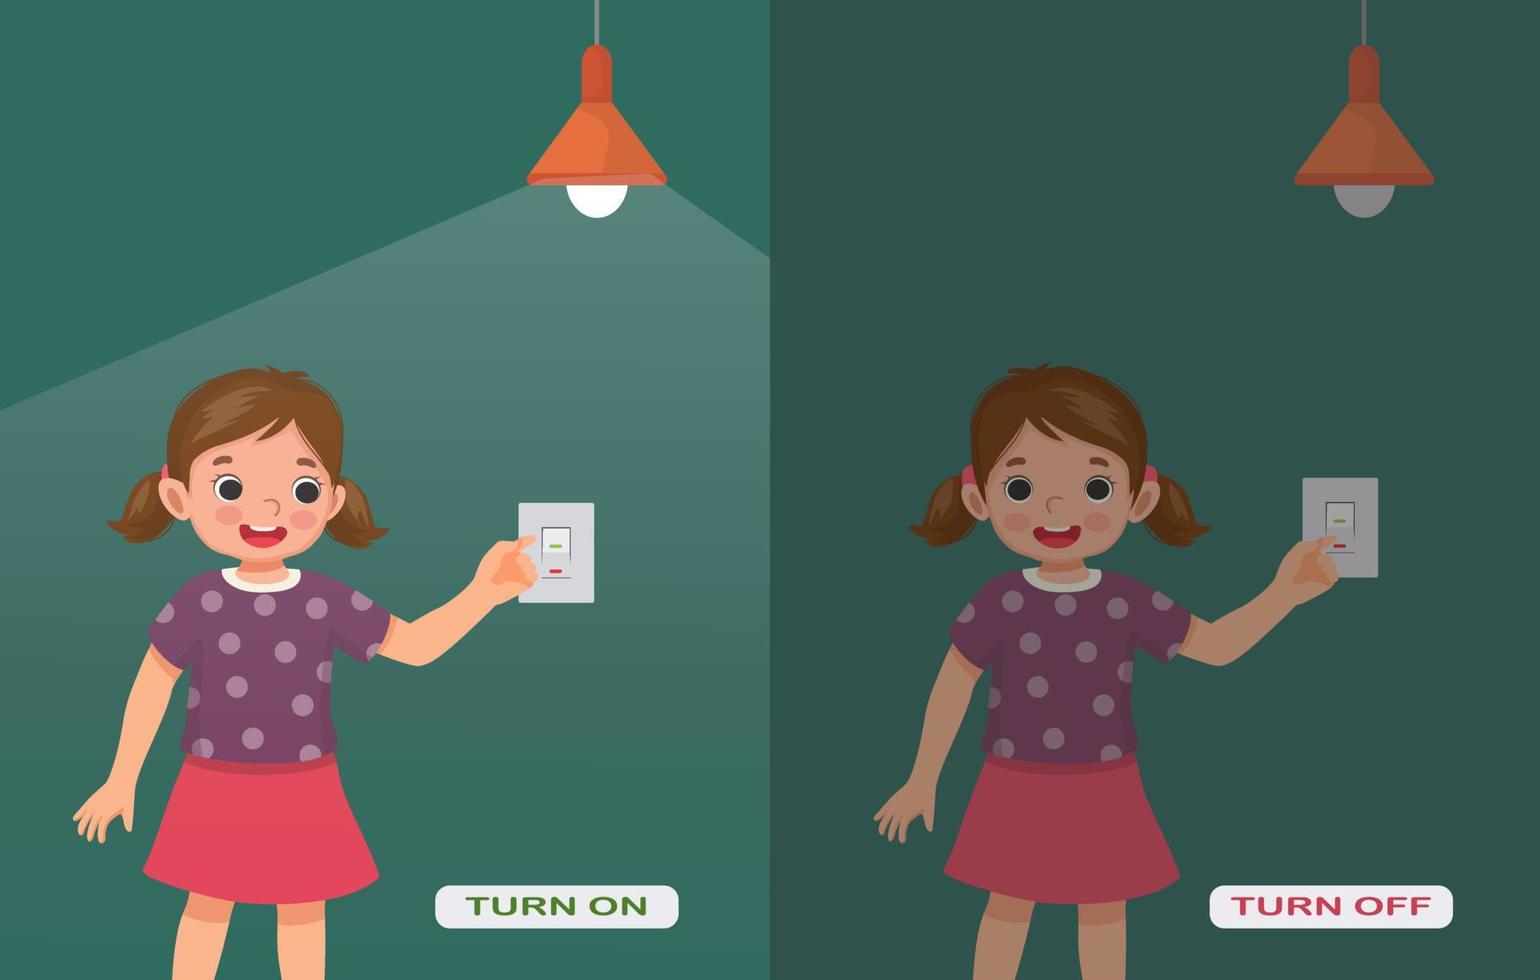 Opposite adjective antonym words turn on and turn off illustration of little girl switch on and off the light explanation flashcard with text label vector